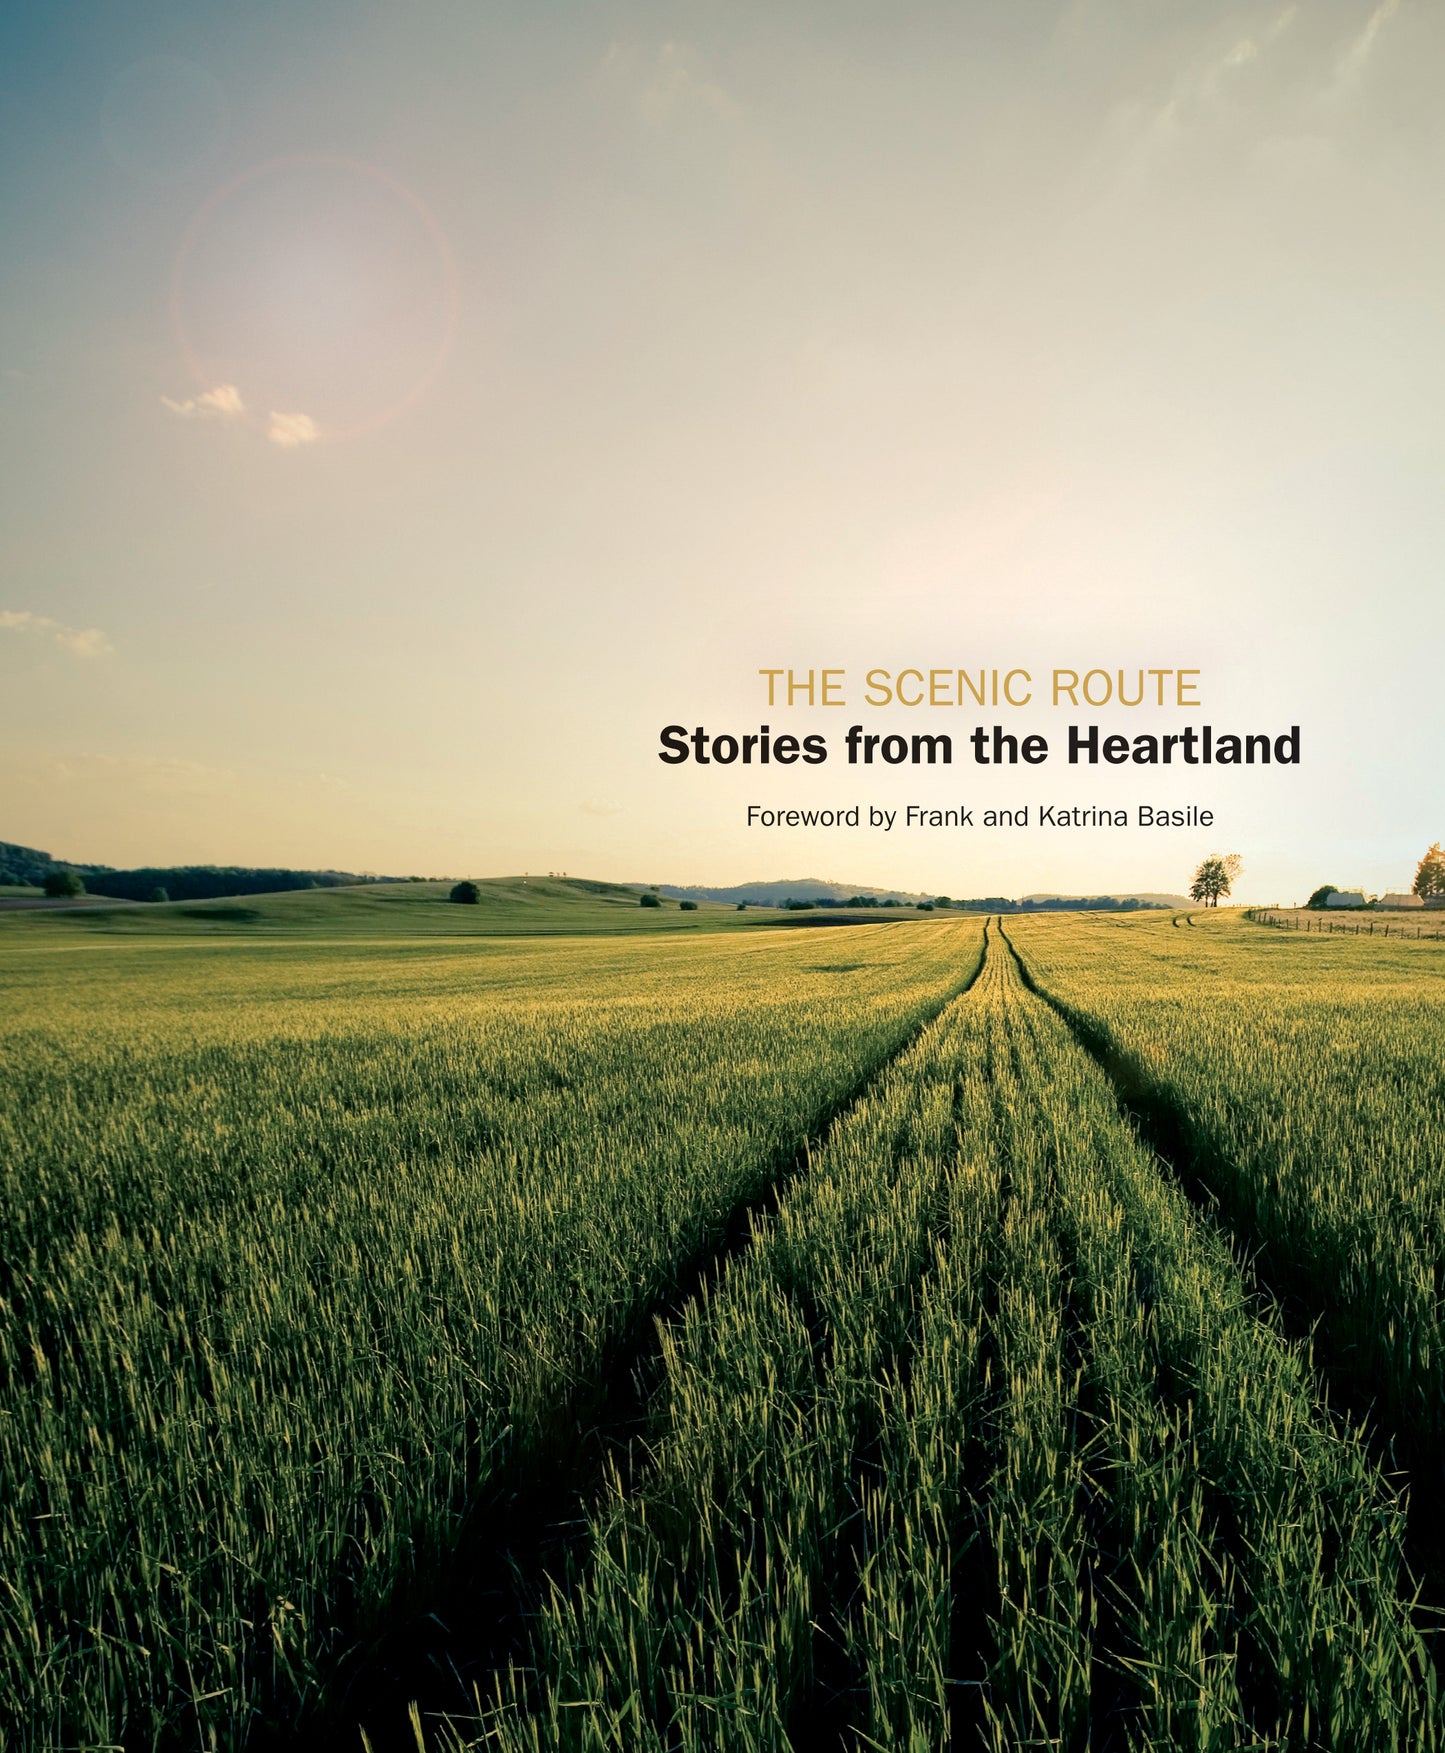 The Scenic Route: Stories from the Heartland